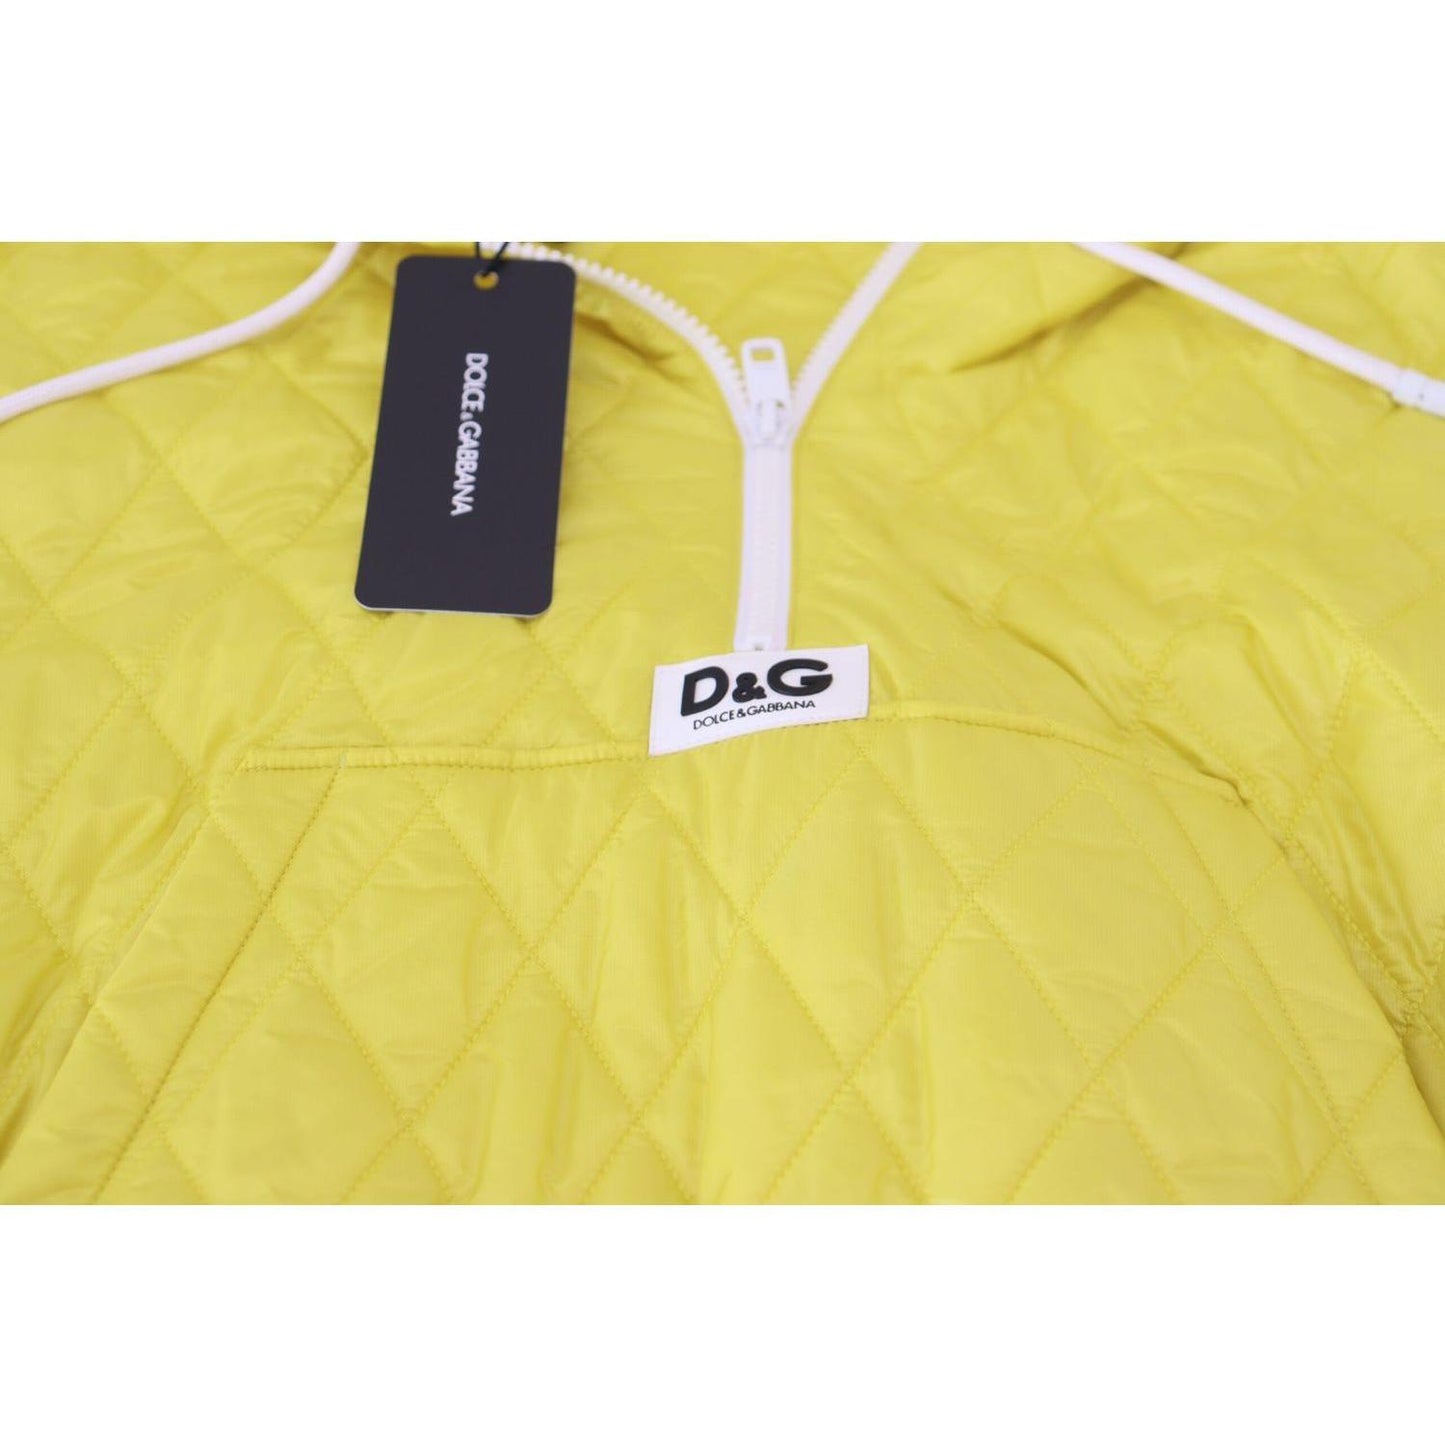 Dolce & Gabbana Elegant Yellow Hooded Jacket yellow-nylon-quilted-hooded-pullover-jacket IMG_2767-scaled-4596e049-aed.jpg